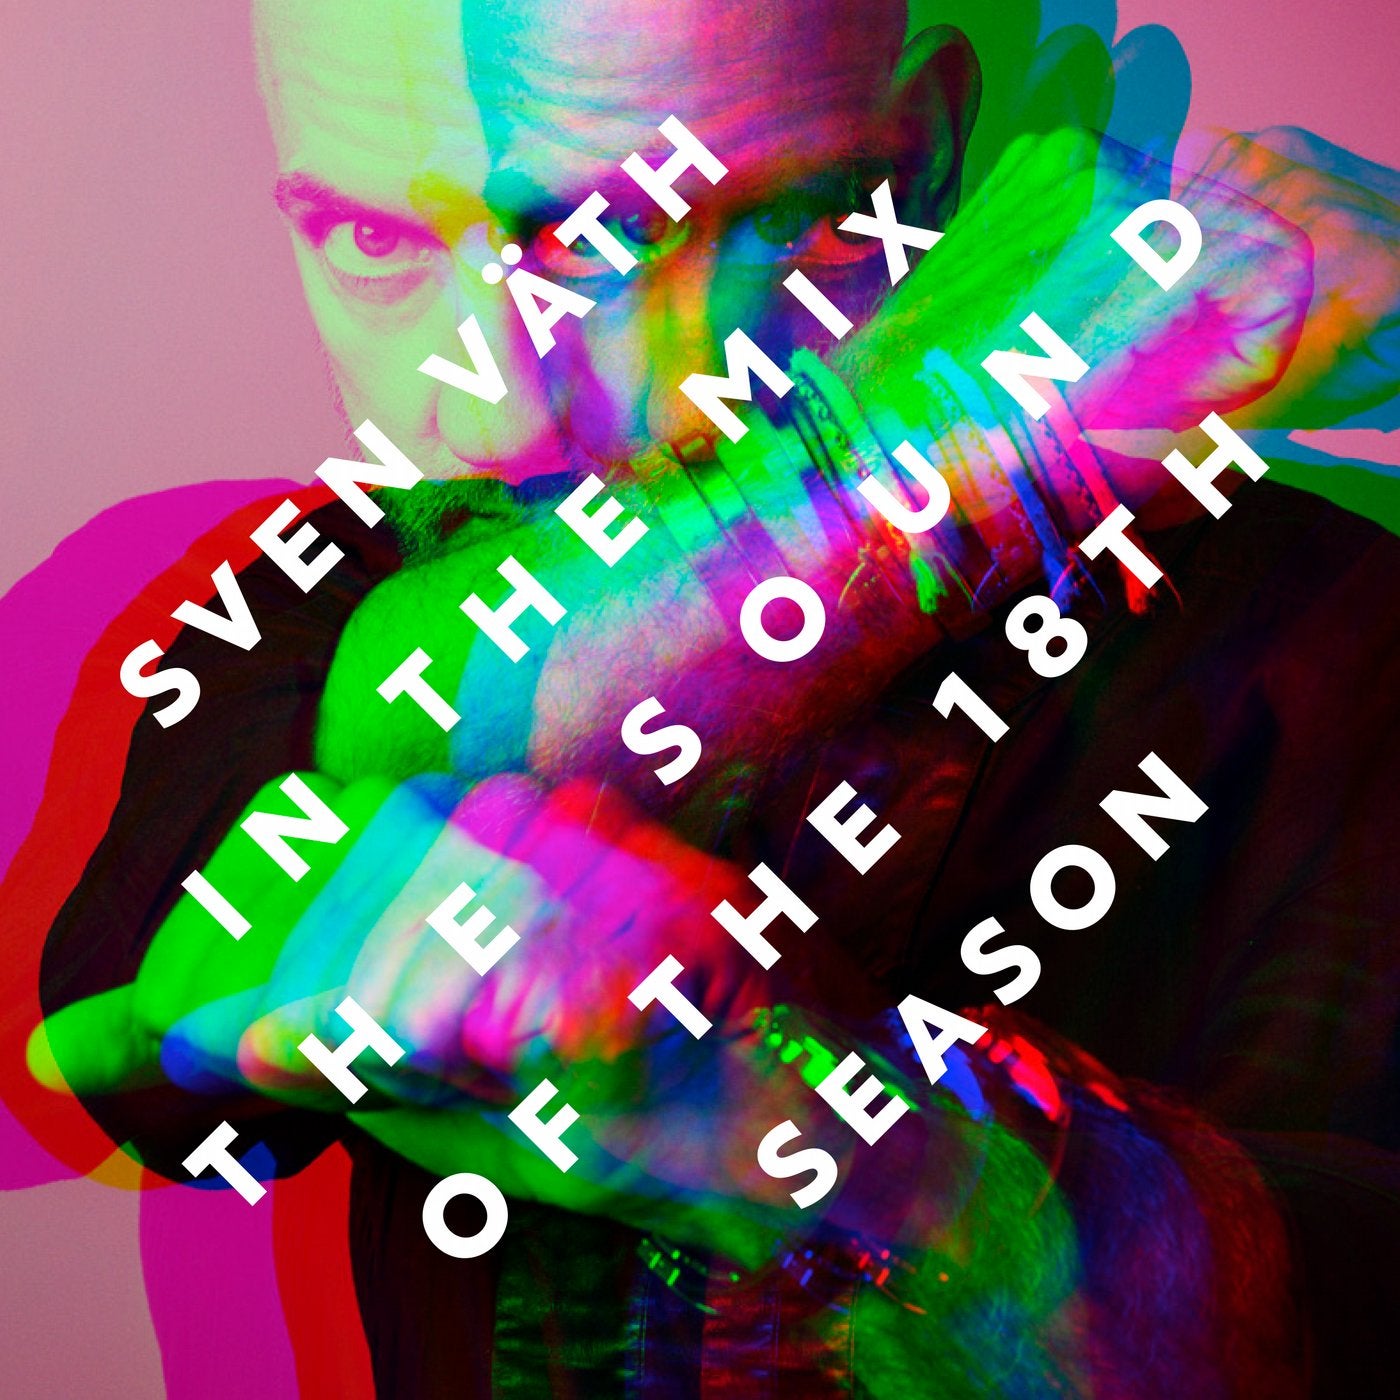 Sven Väth In The Mix - The Sound Of The 18th Season